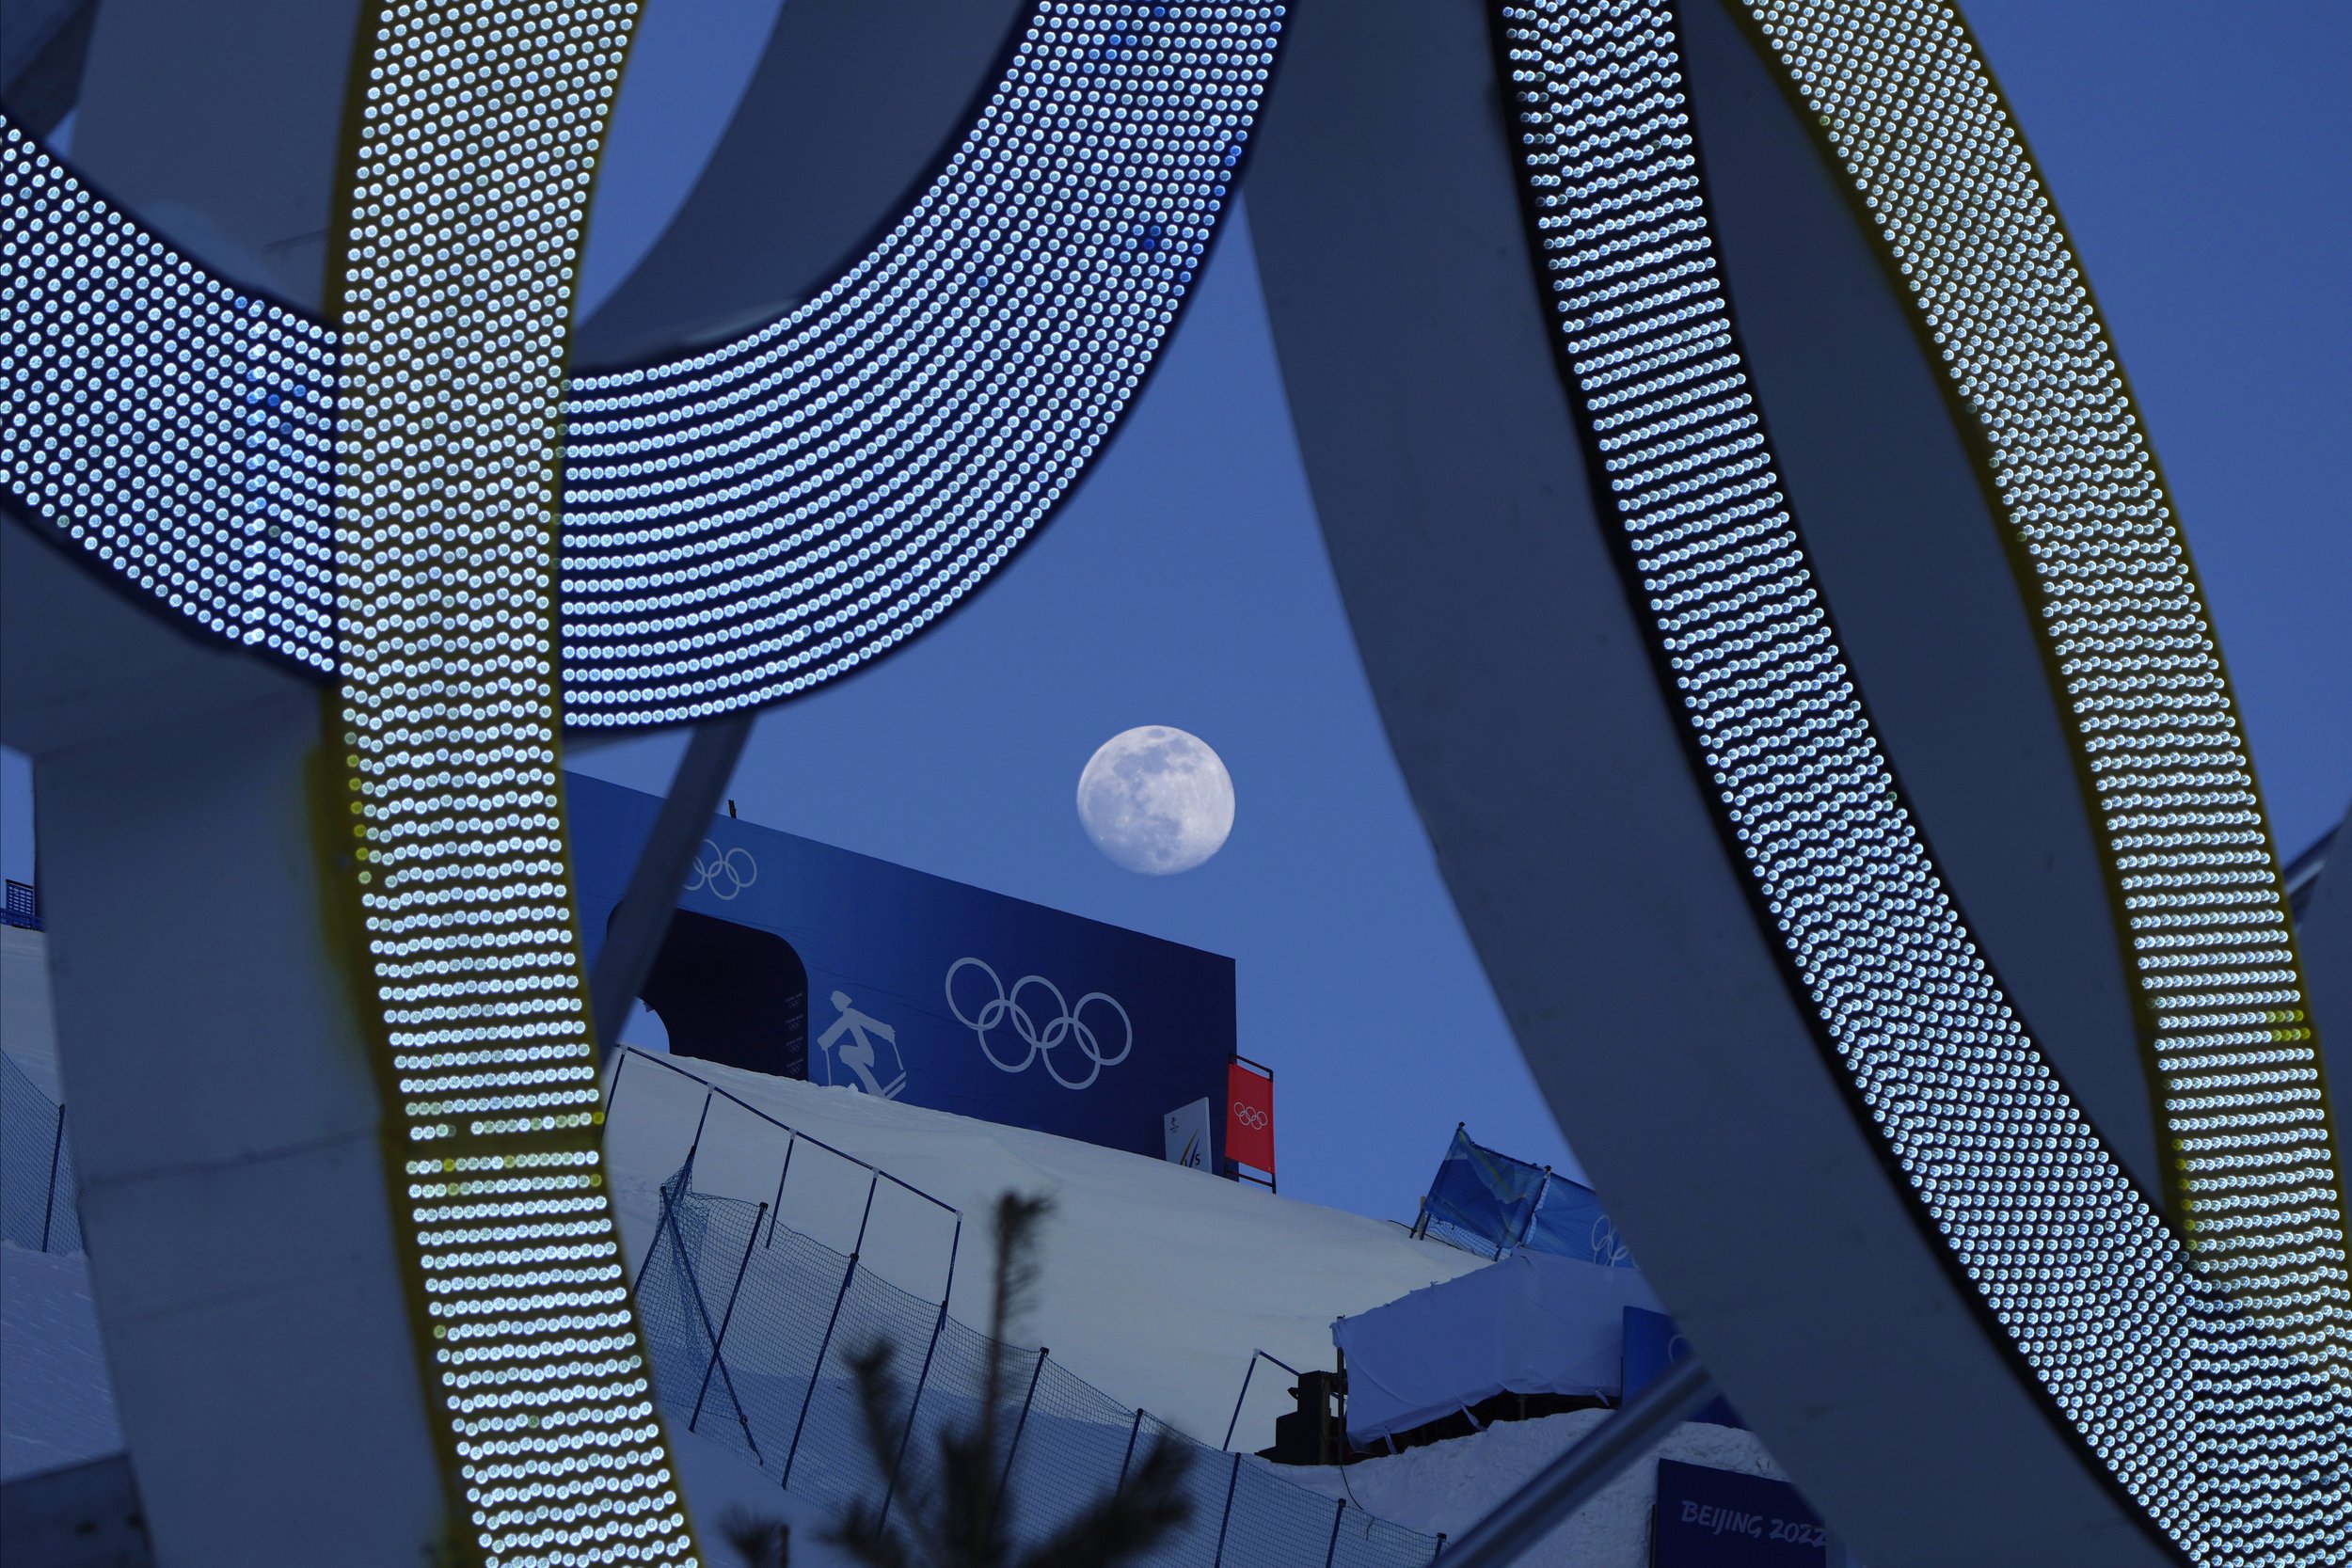  The moon rises over Genting Snow Park before the women's freestyle skiing aerials finals at the 2022 Winter Olympics, Monday, Feb. 14, 2022, in Zhangjiakou, China. (AP Photo/Kiichiro Sato) 